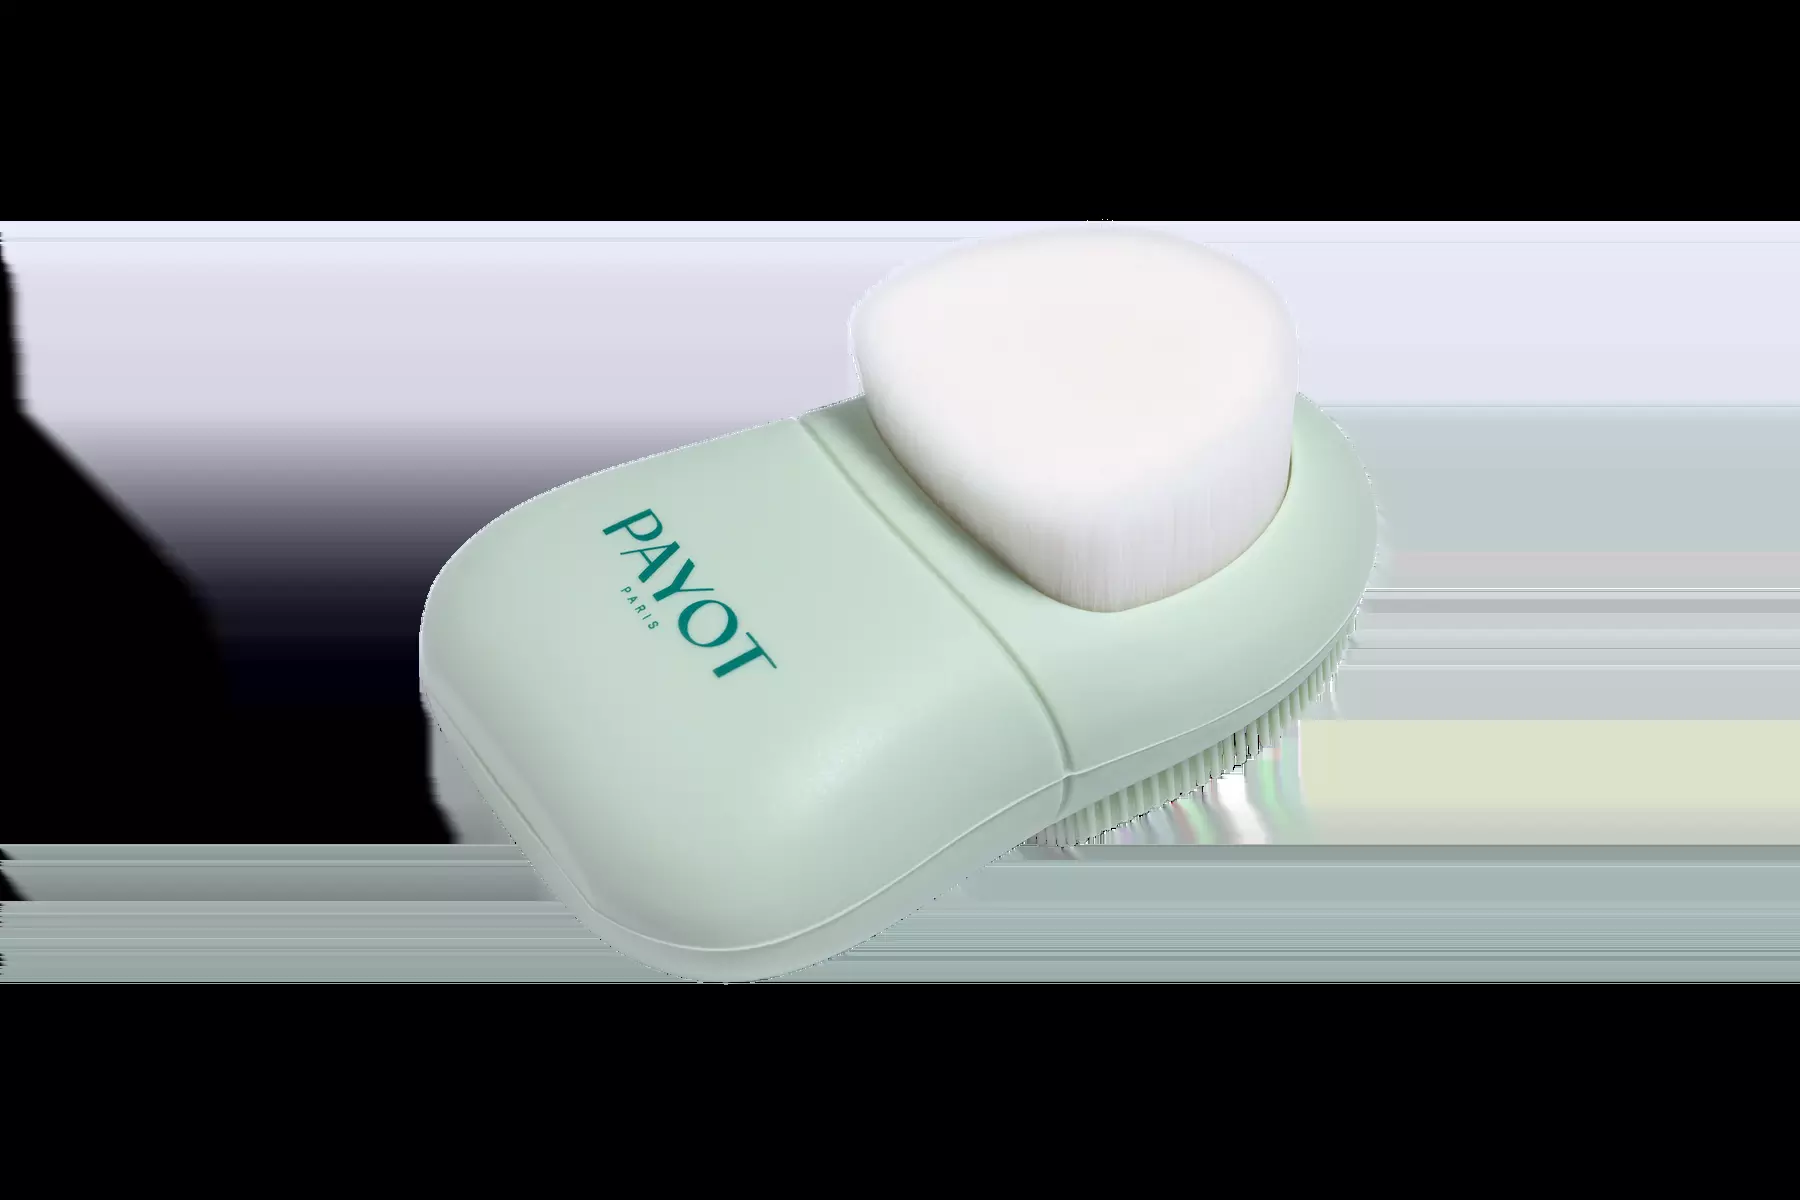 Payot Pate Grise Face Cleansing Brush